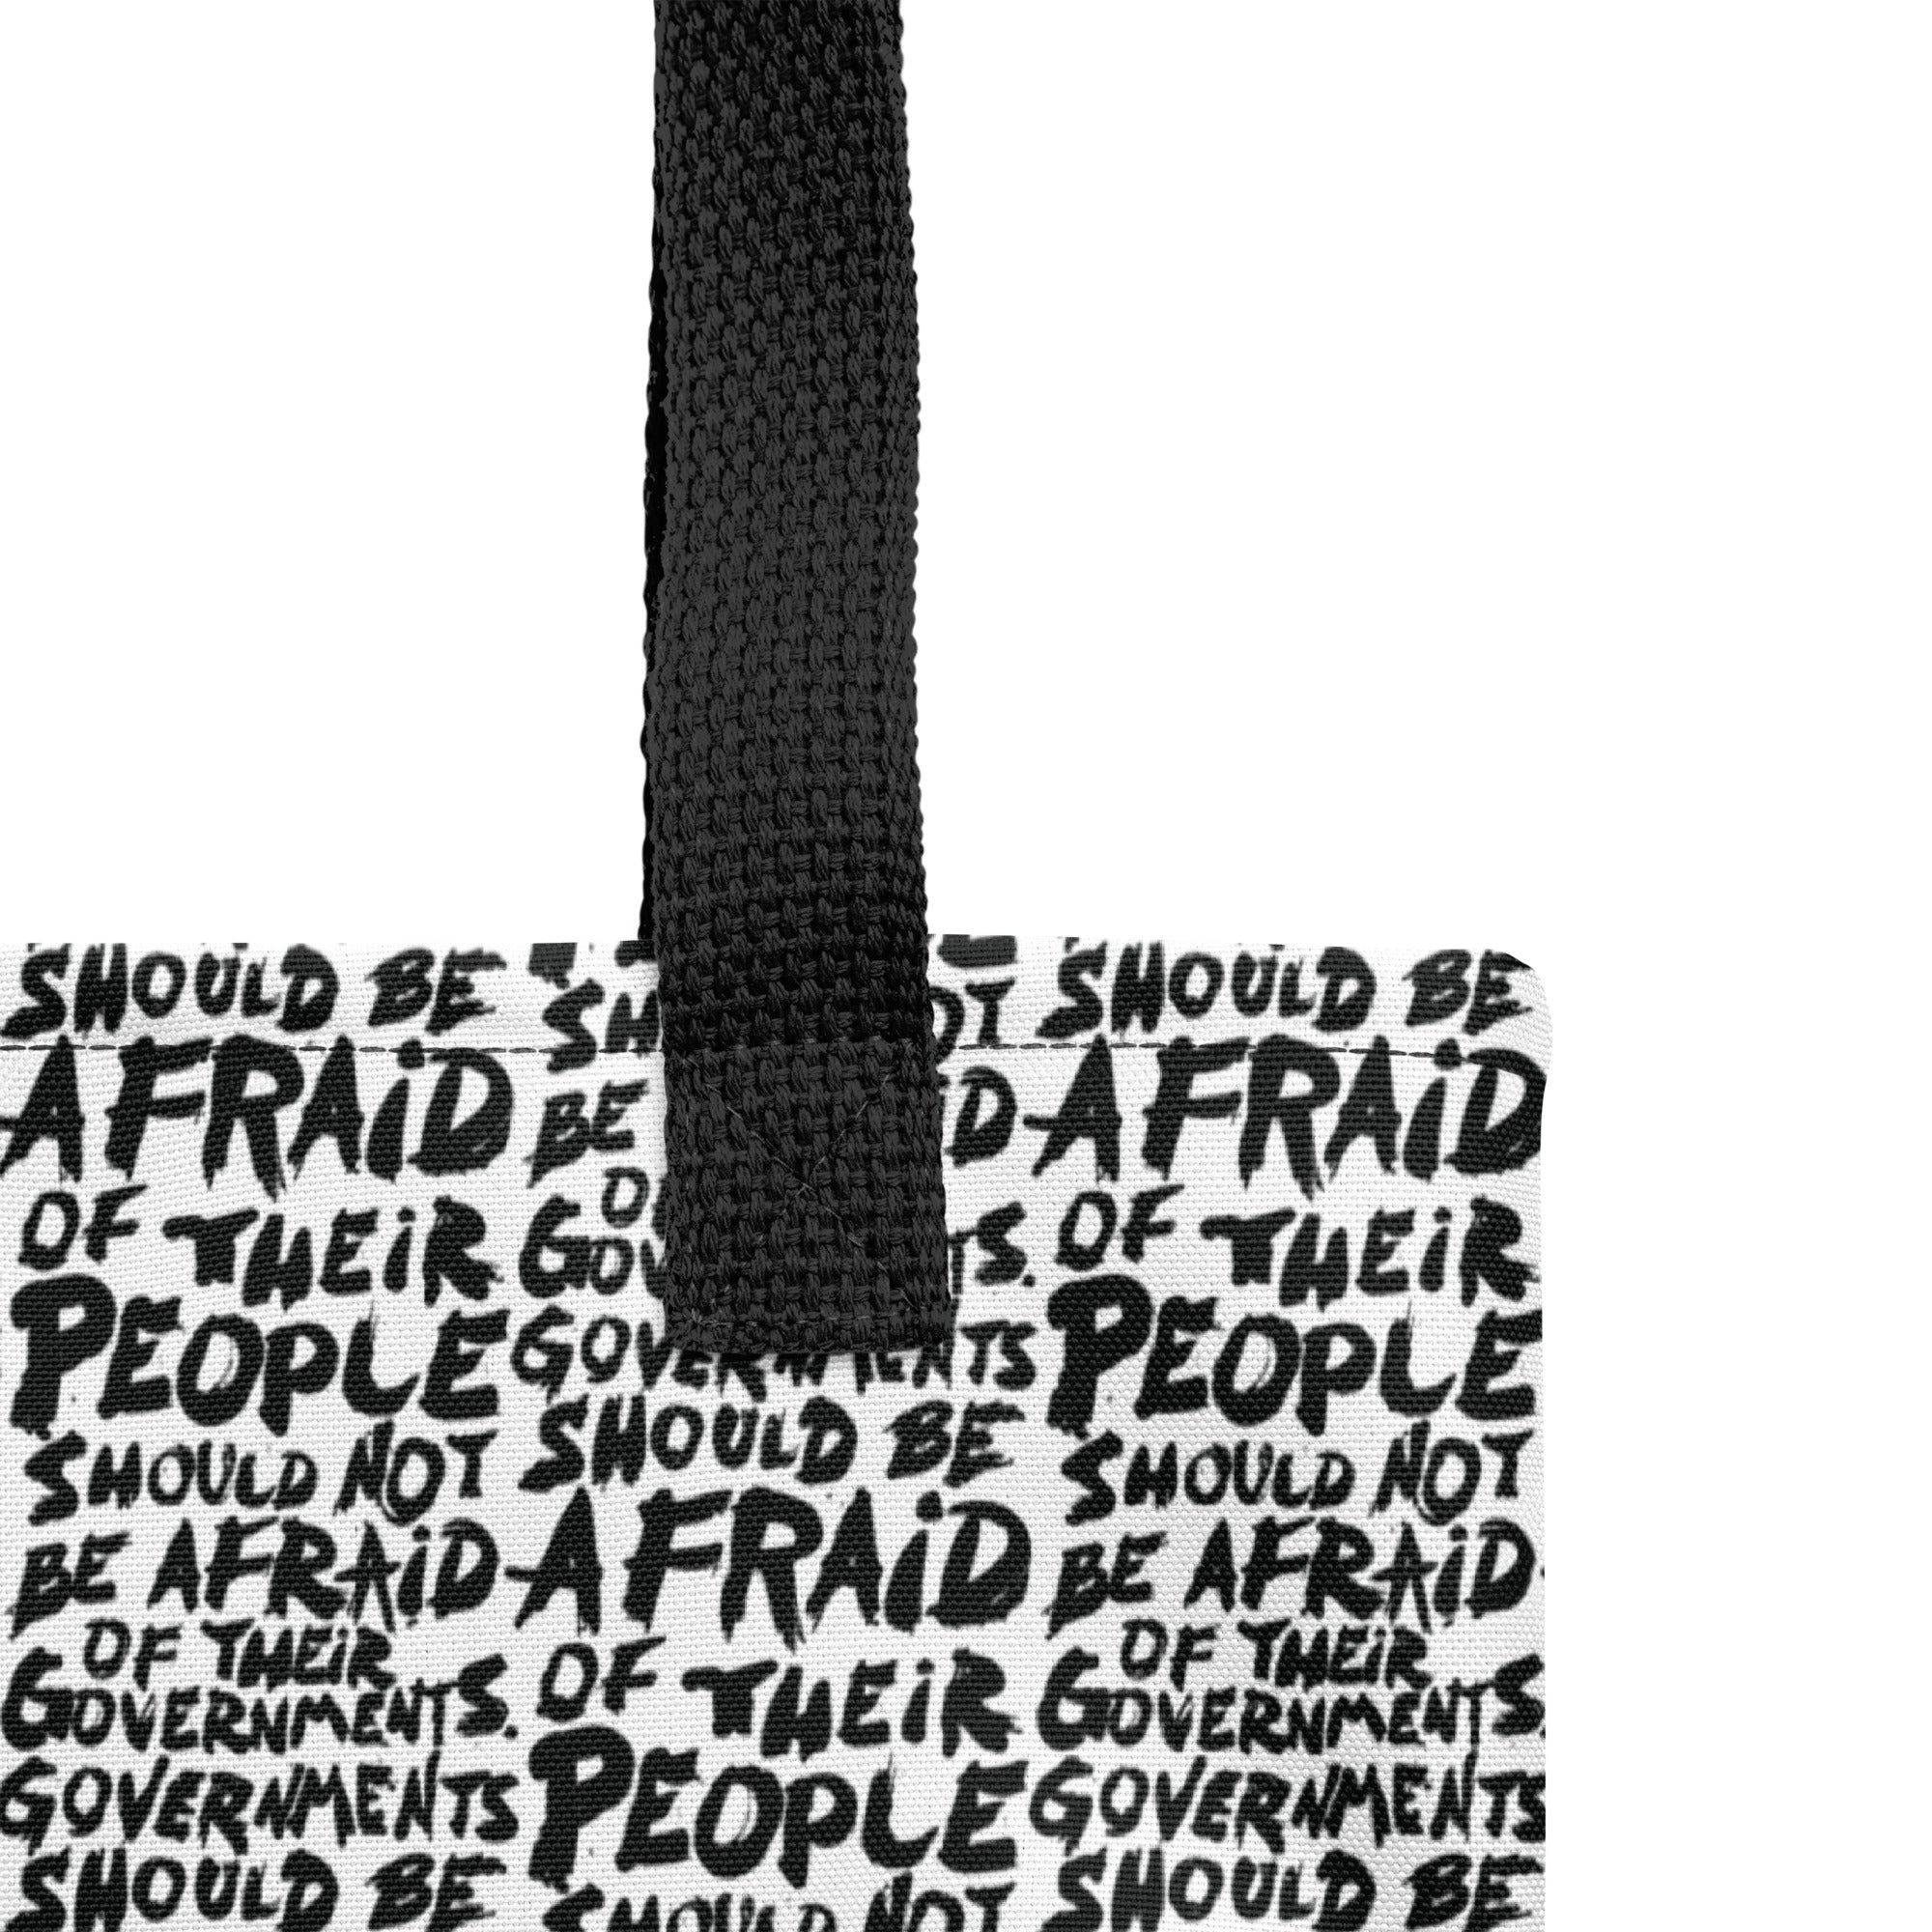 People Should Not Be Afraid of Their Governments Jefferson Quote Tote Bag